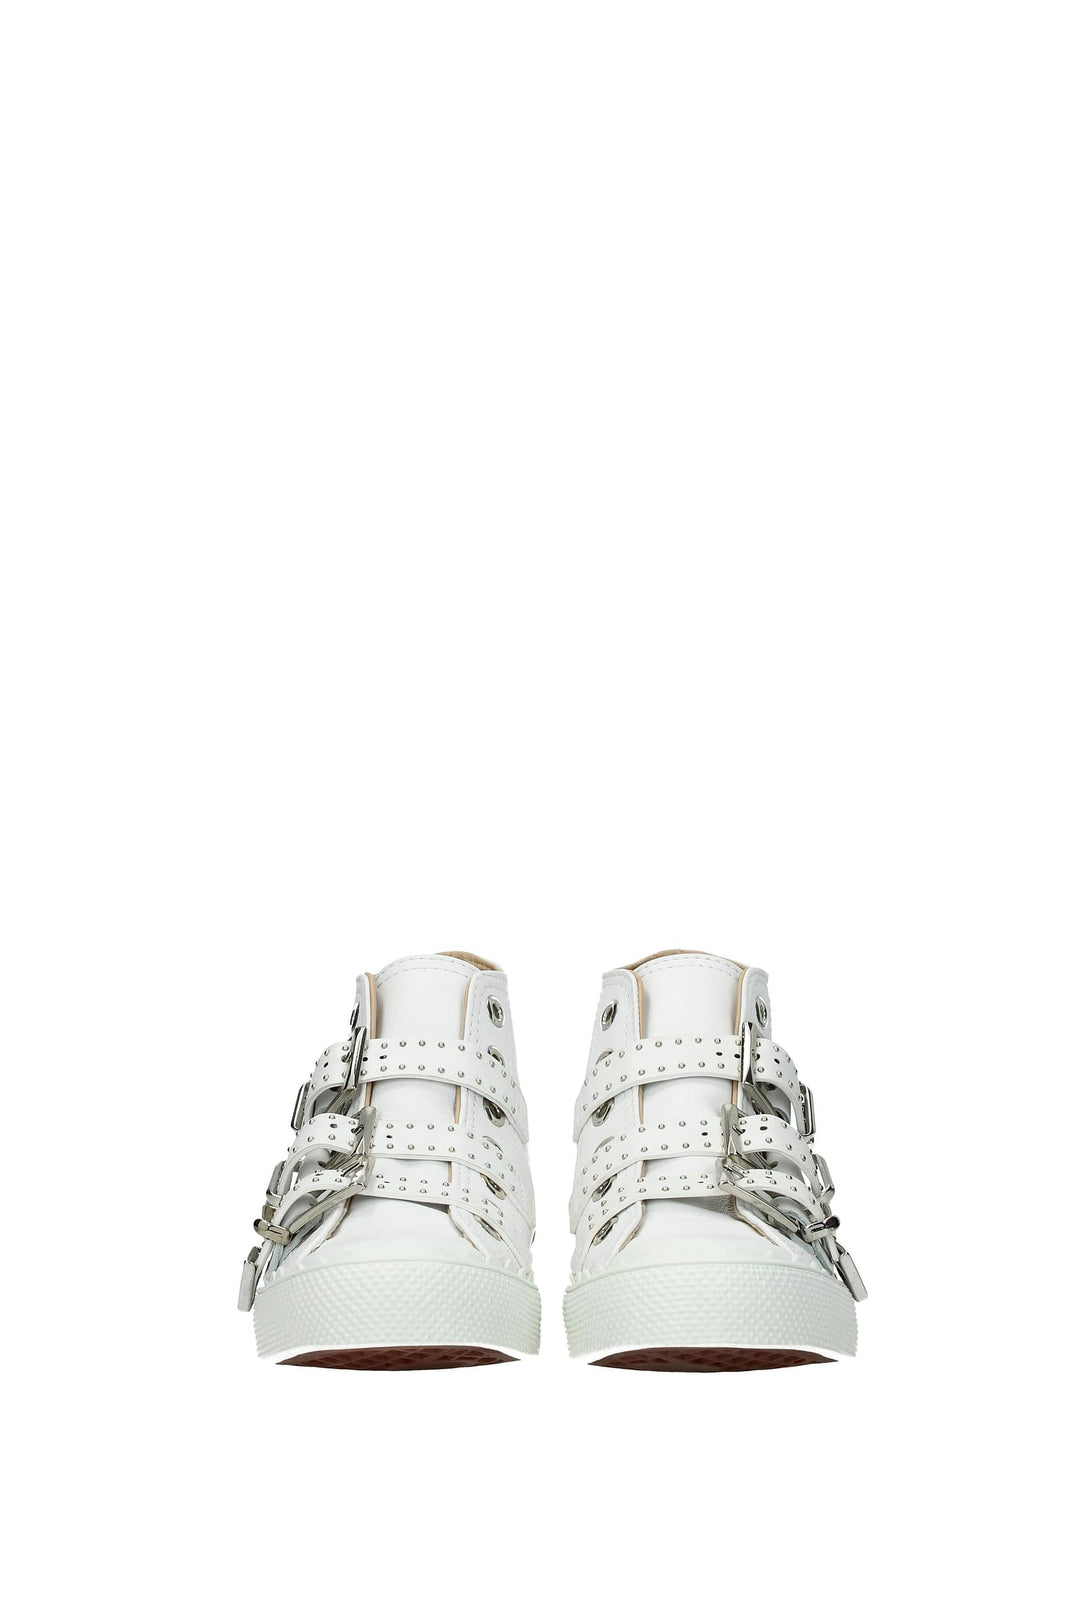 Sneakers Pelle Bianco - Chloé - Donna